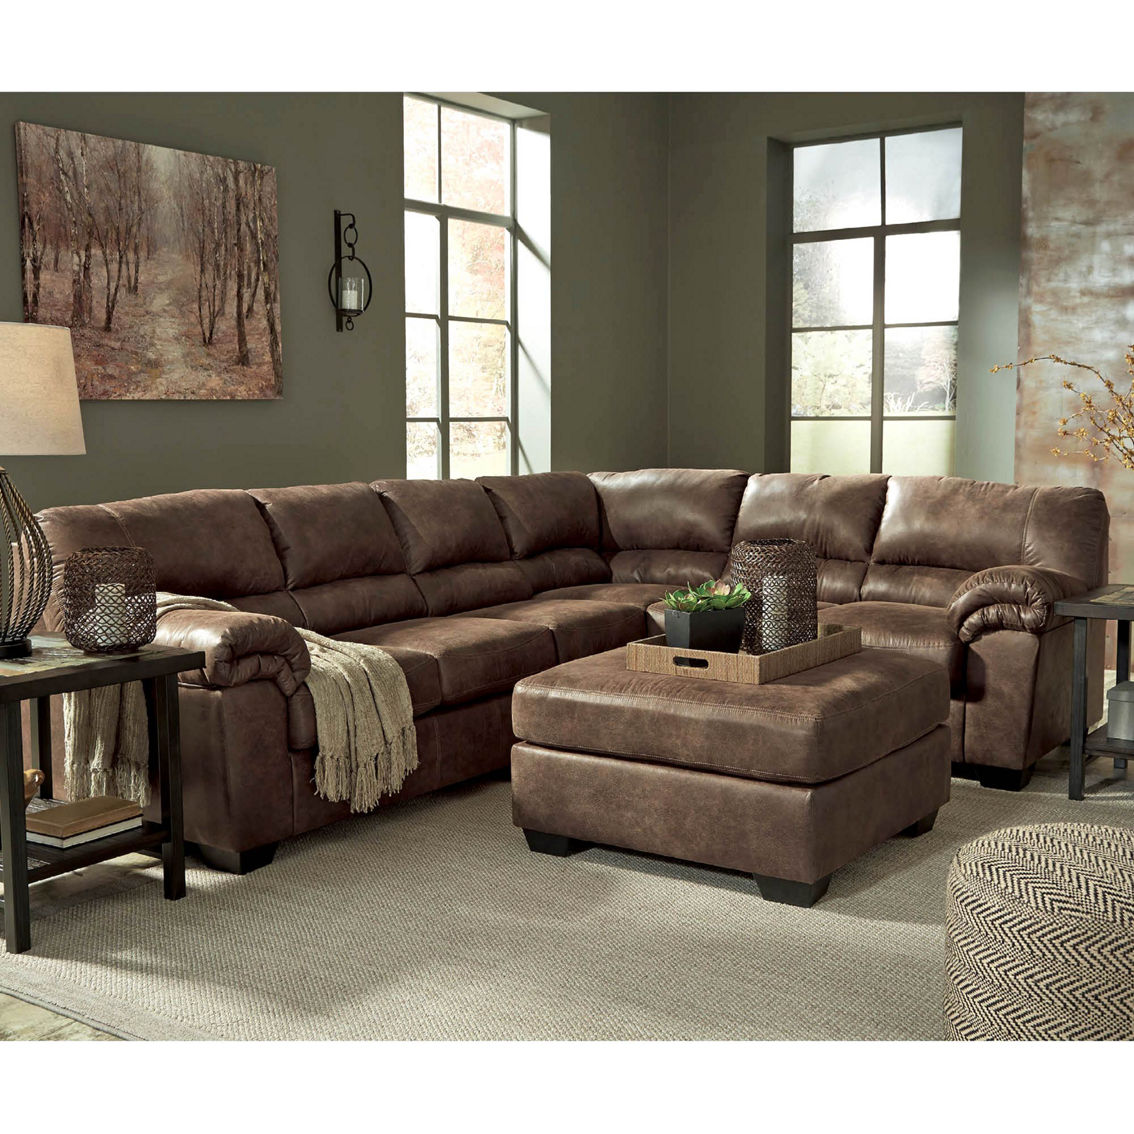 Signature Design by Ashley Bladen LAF Loveseat/Chair/RAF Sofa 3 pc. Sectional - Image 2 of 2